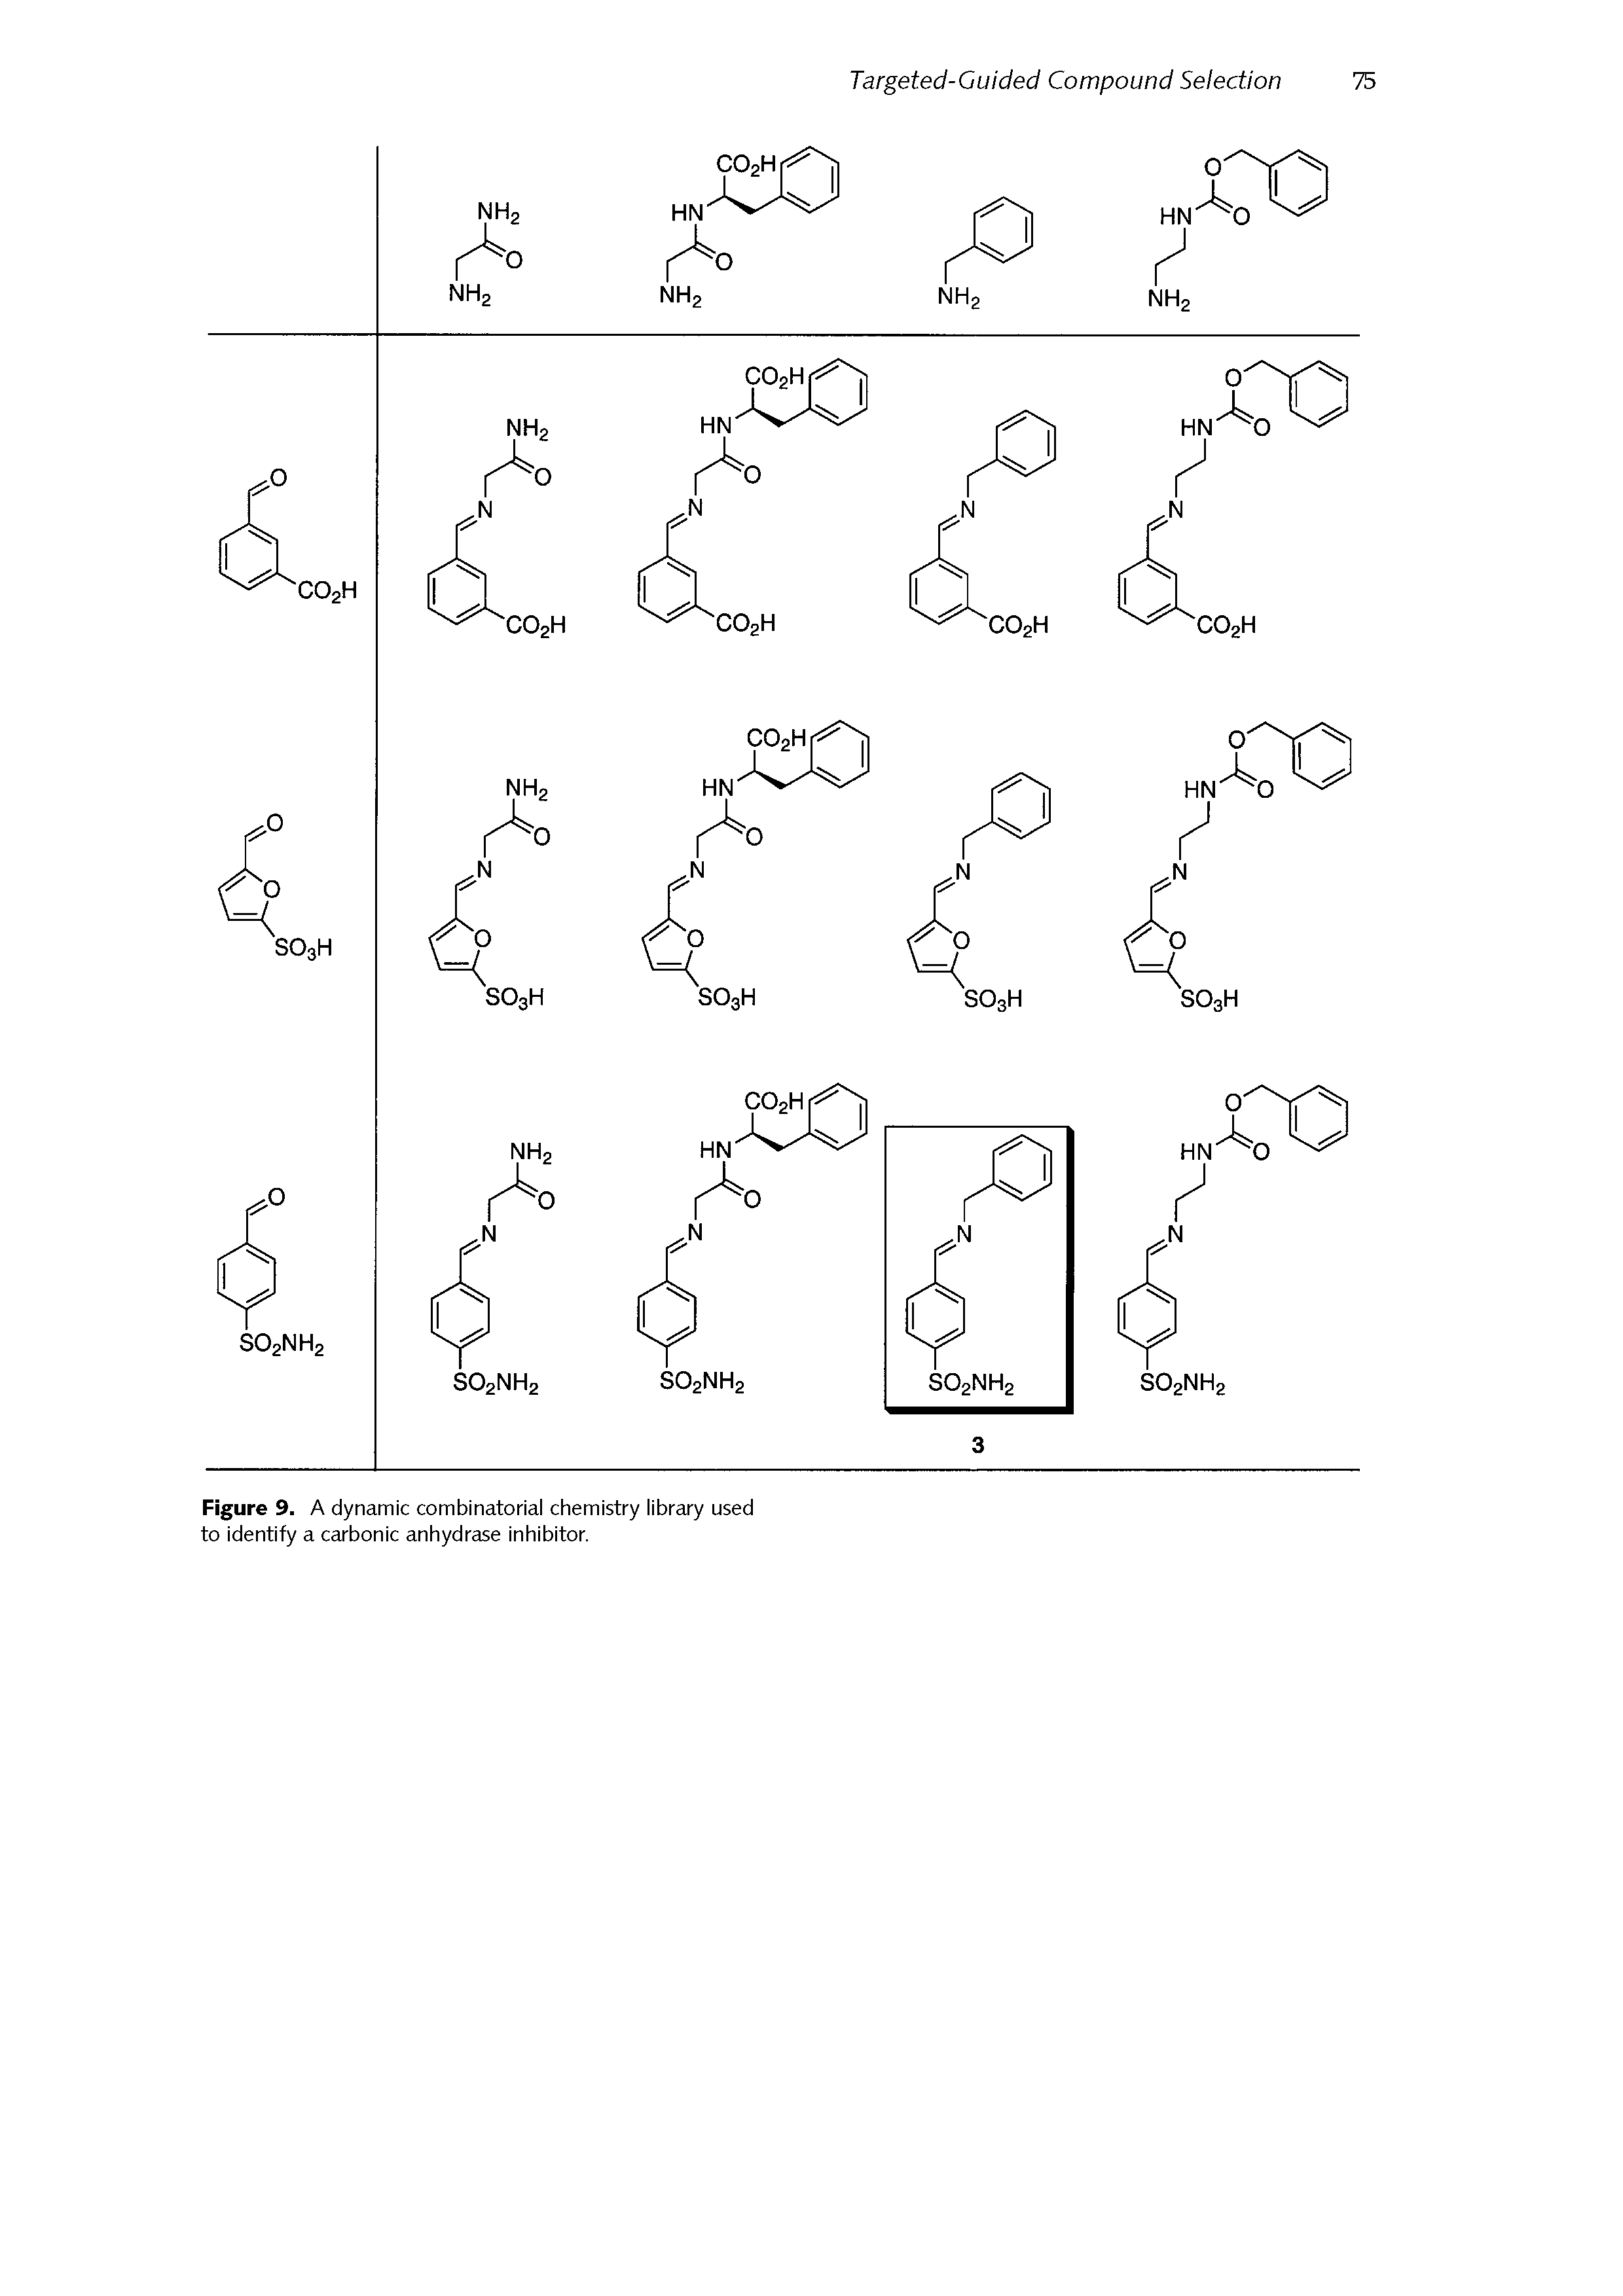 Figure 9. A dynamic combinatorial chemistry library used to identify a carbonic anhydrase inhibitor.